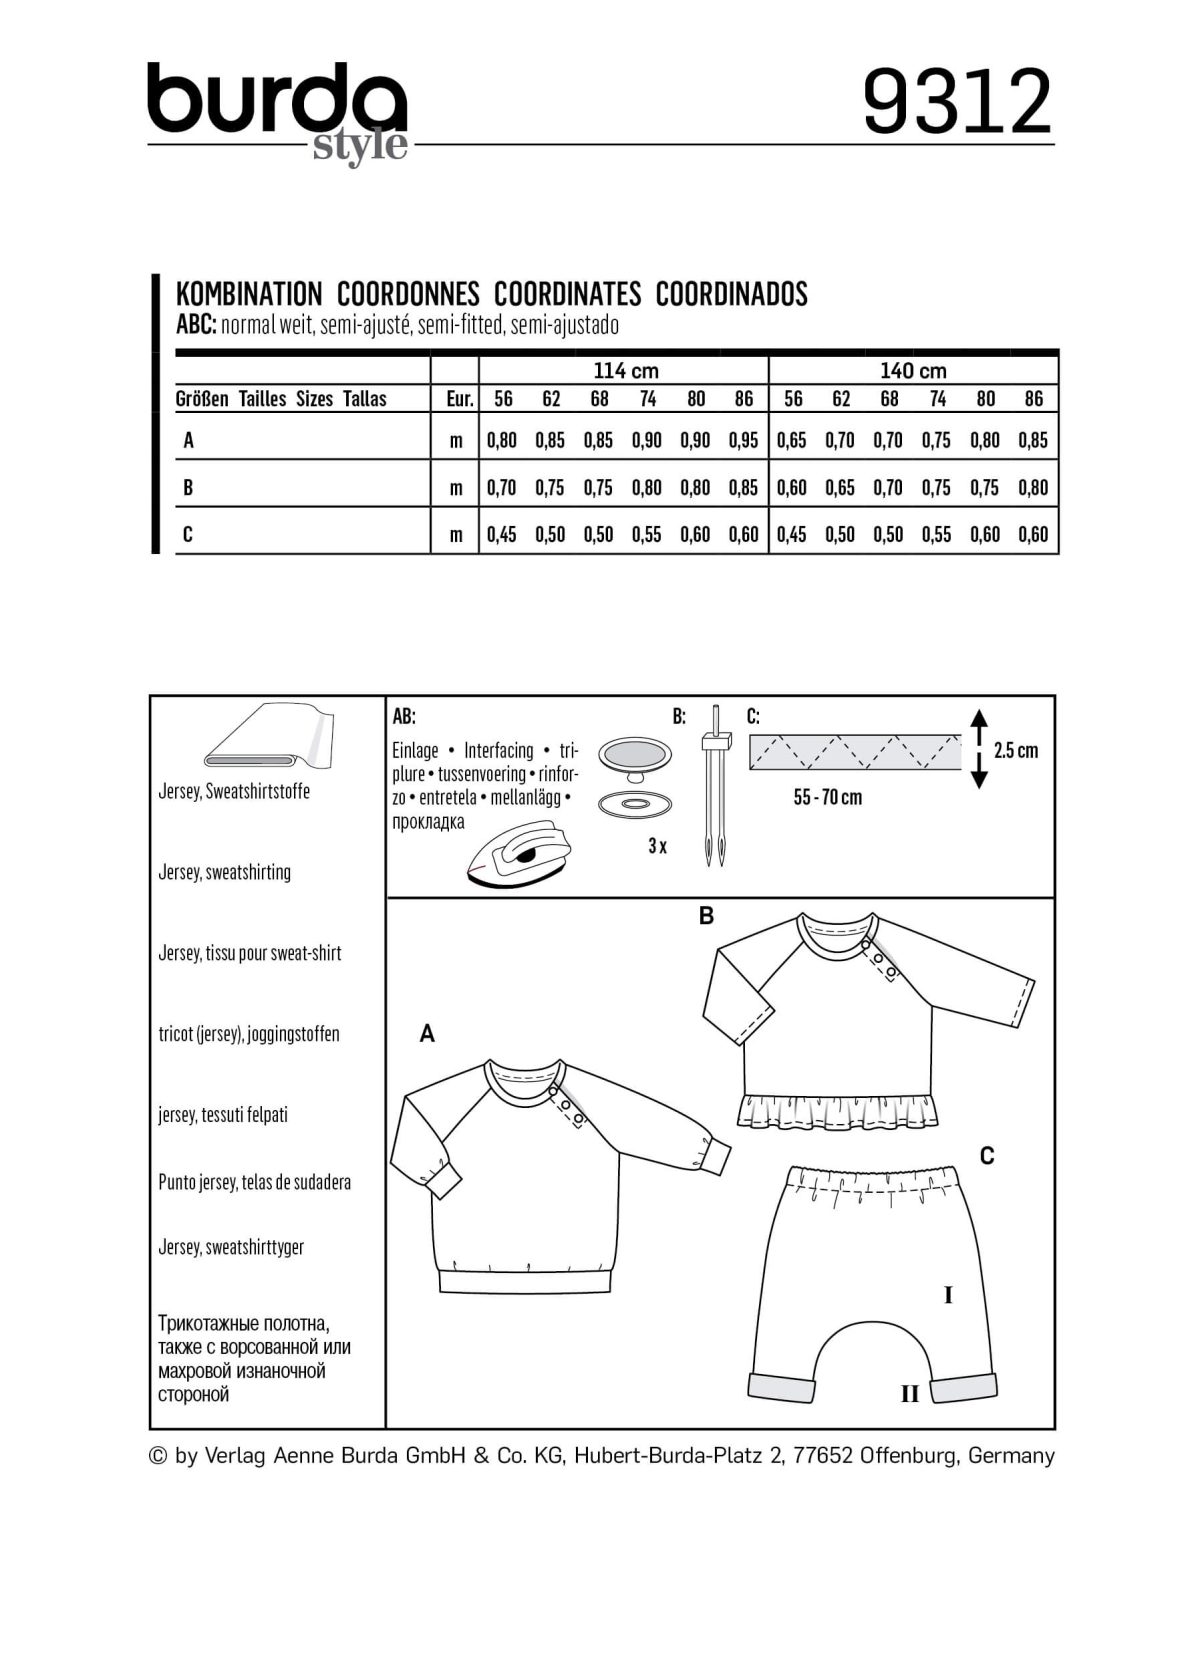 Burda Style Pattern 9312 Babies' Coordinates, Pull-On Top and Pants